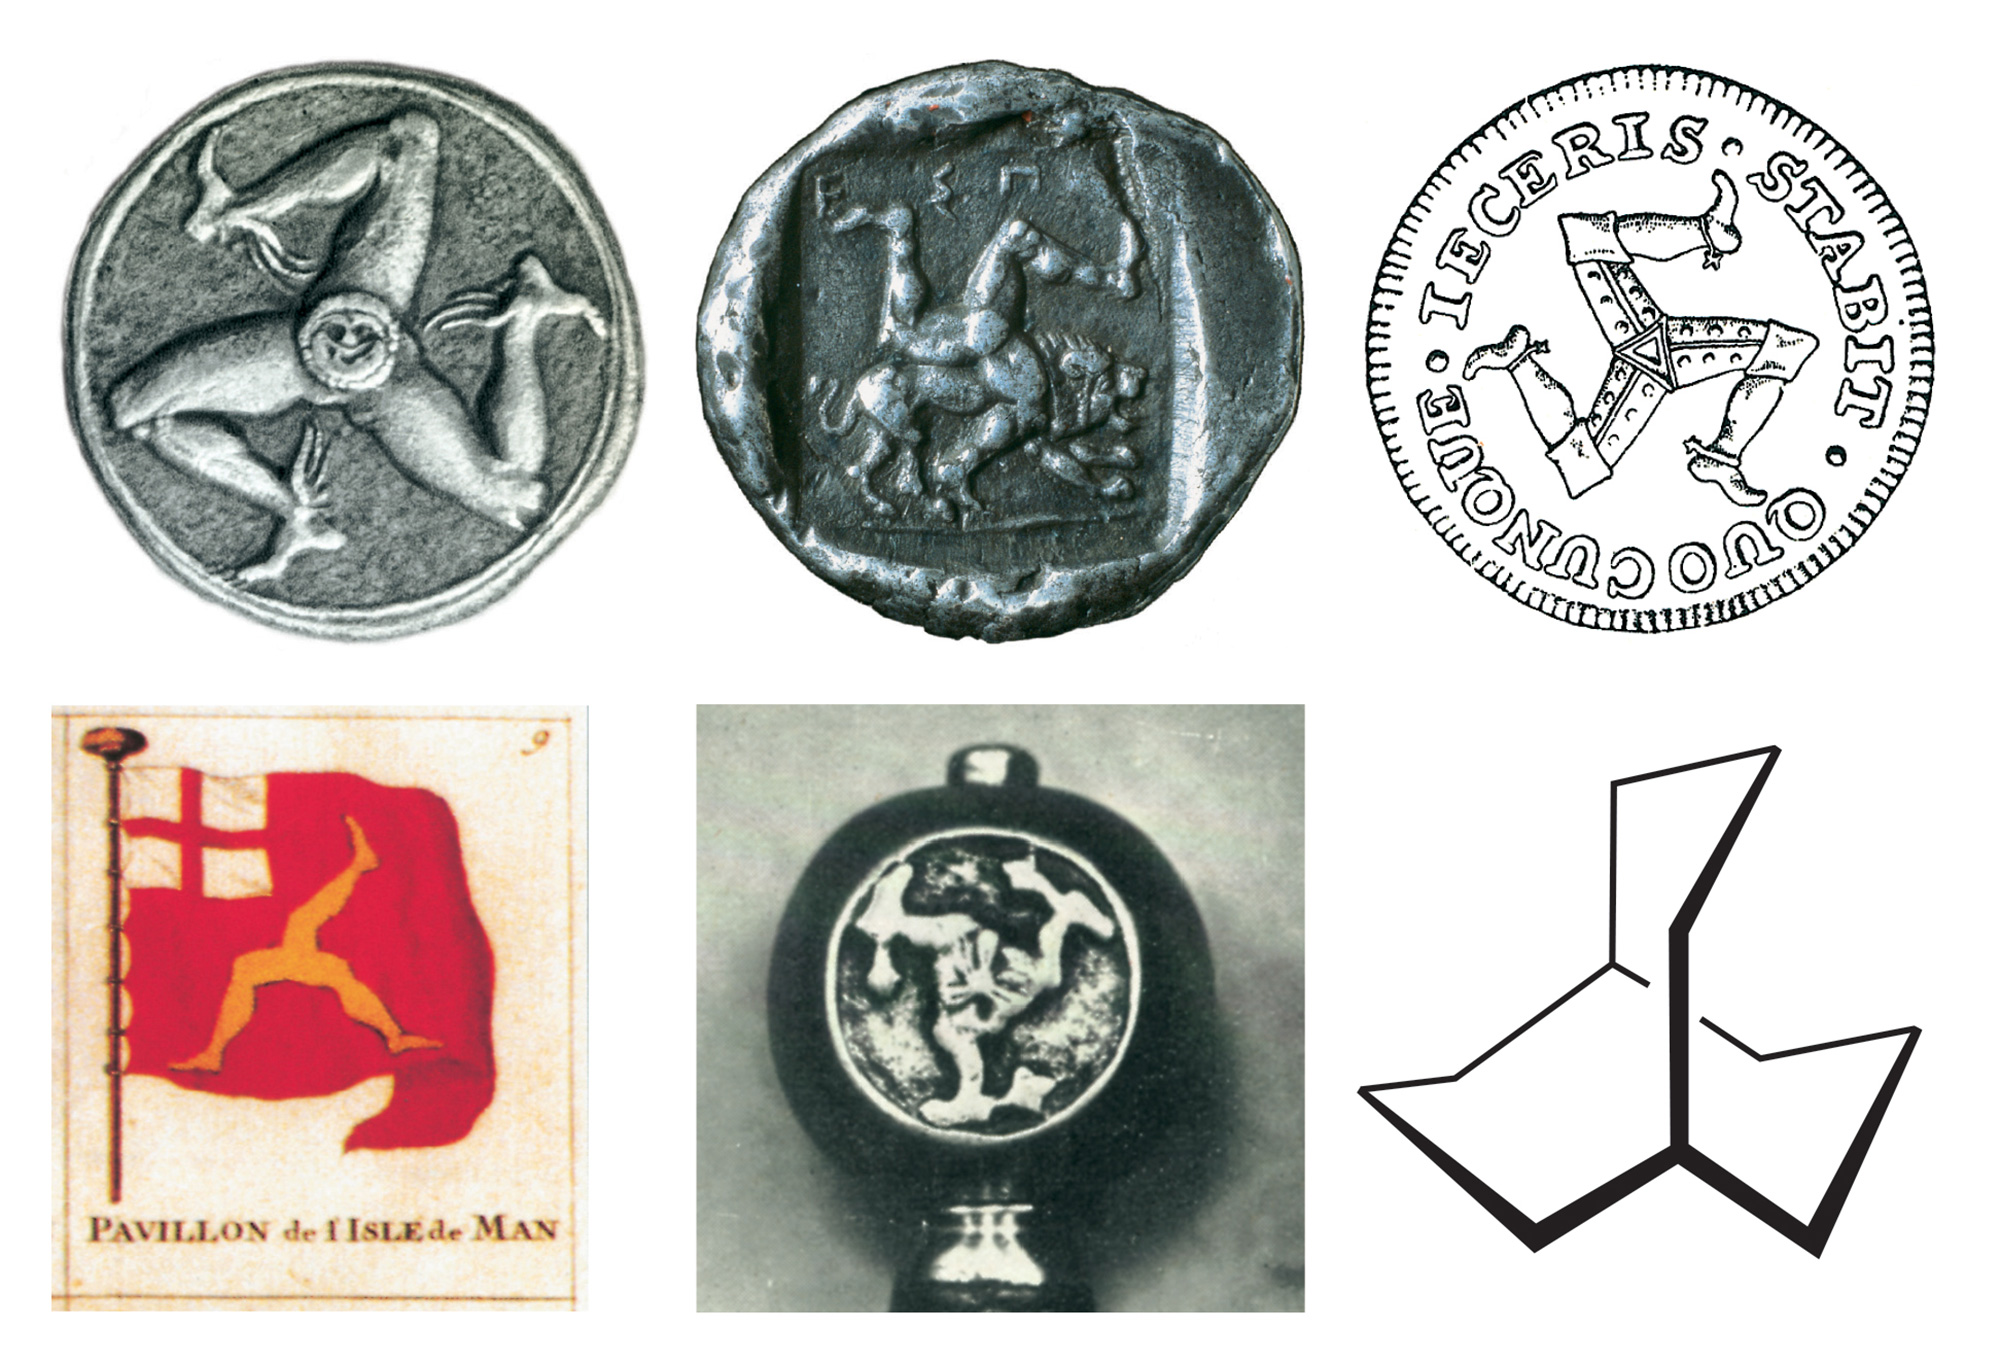 Various coins, flags, and molecules depicting triskelions.